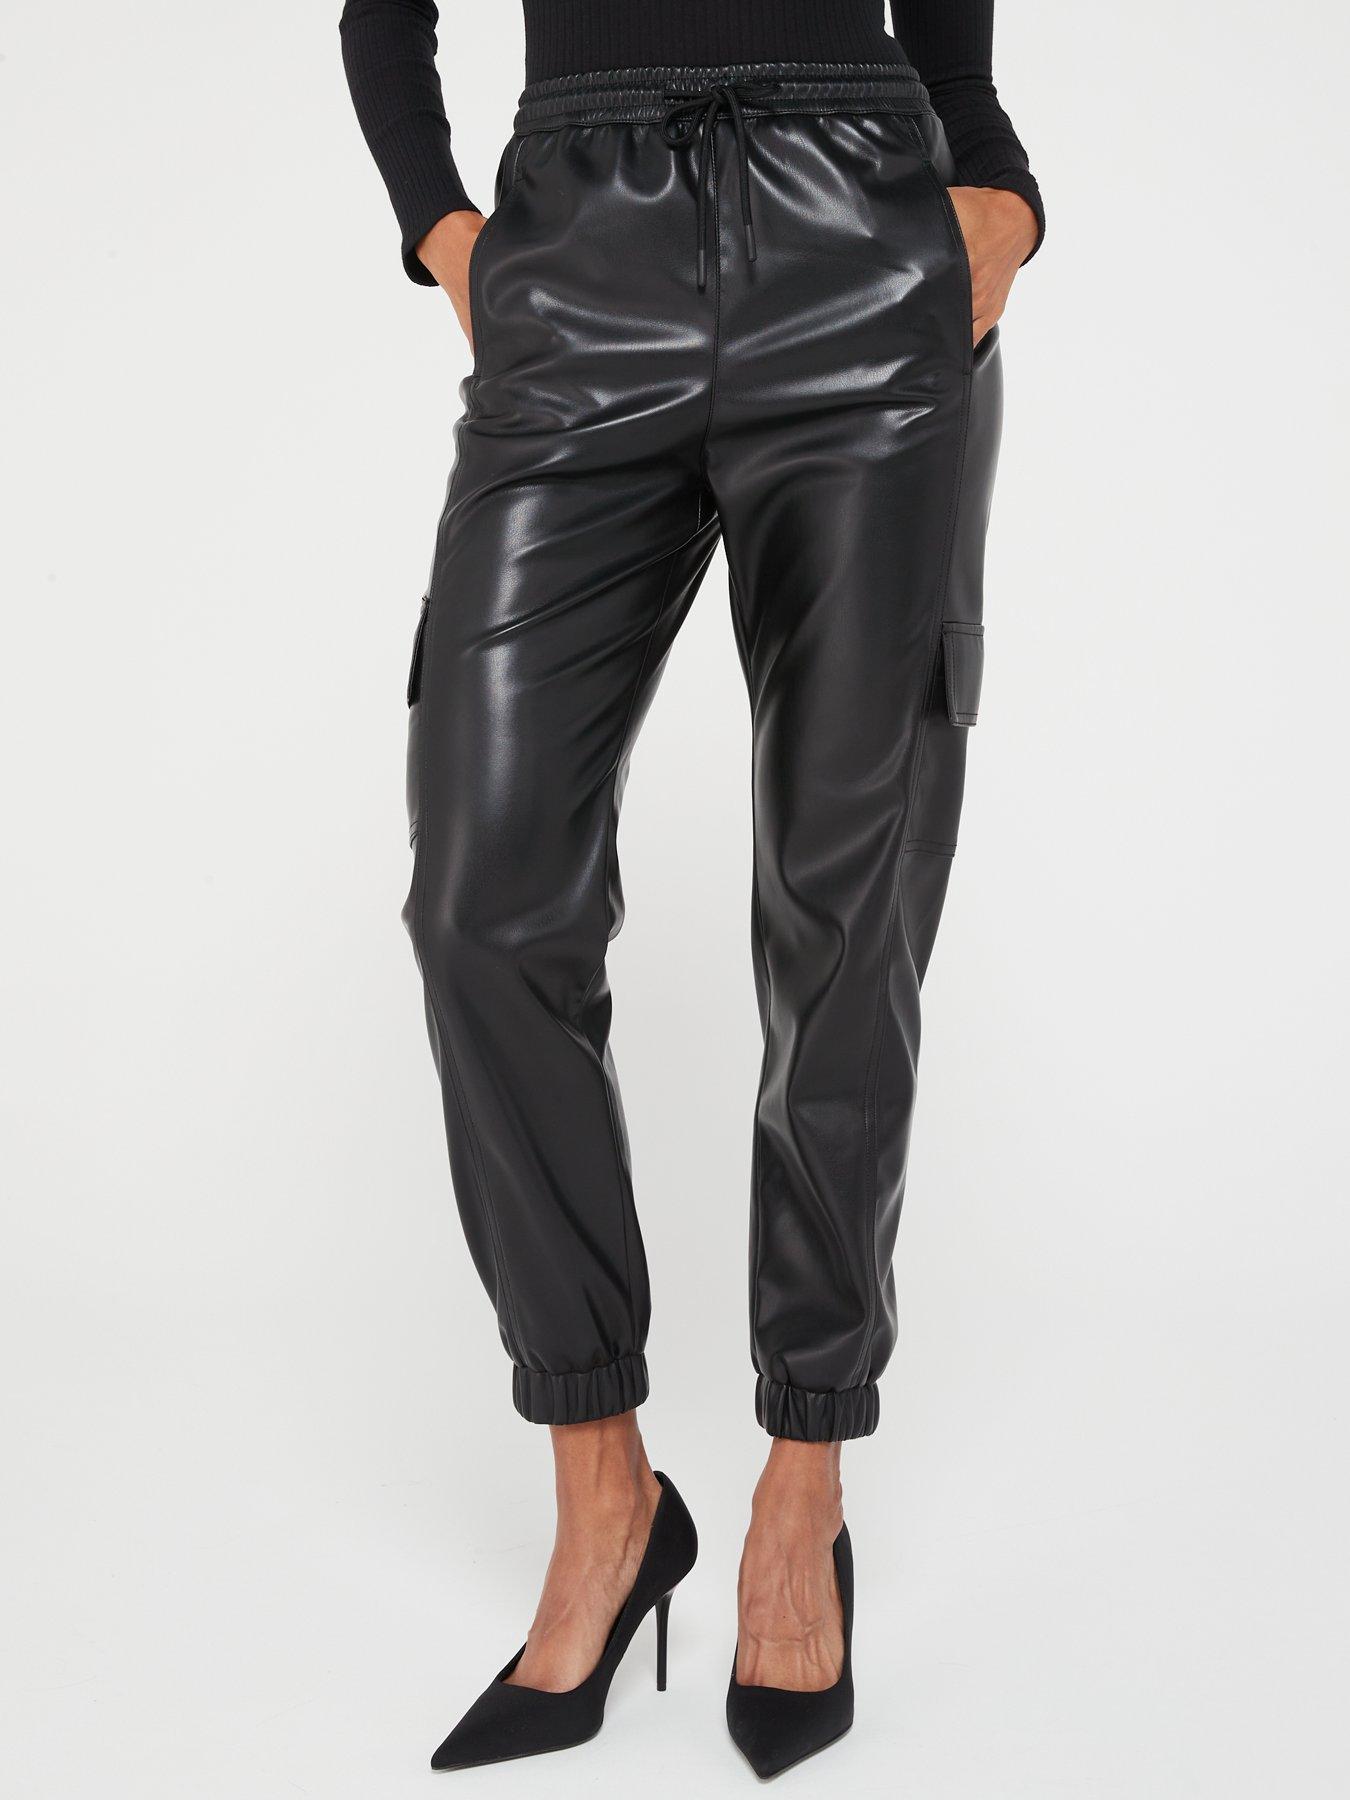 Spanx Leather-Like Joggers are finally back in stock: Why shoppers